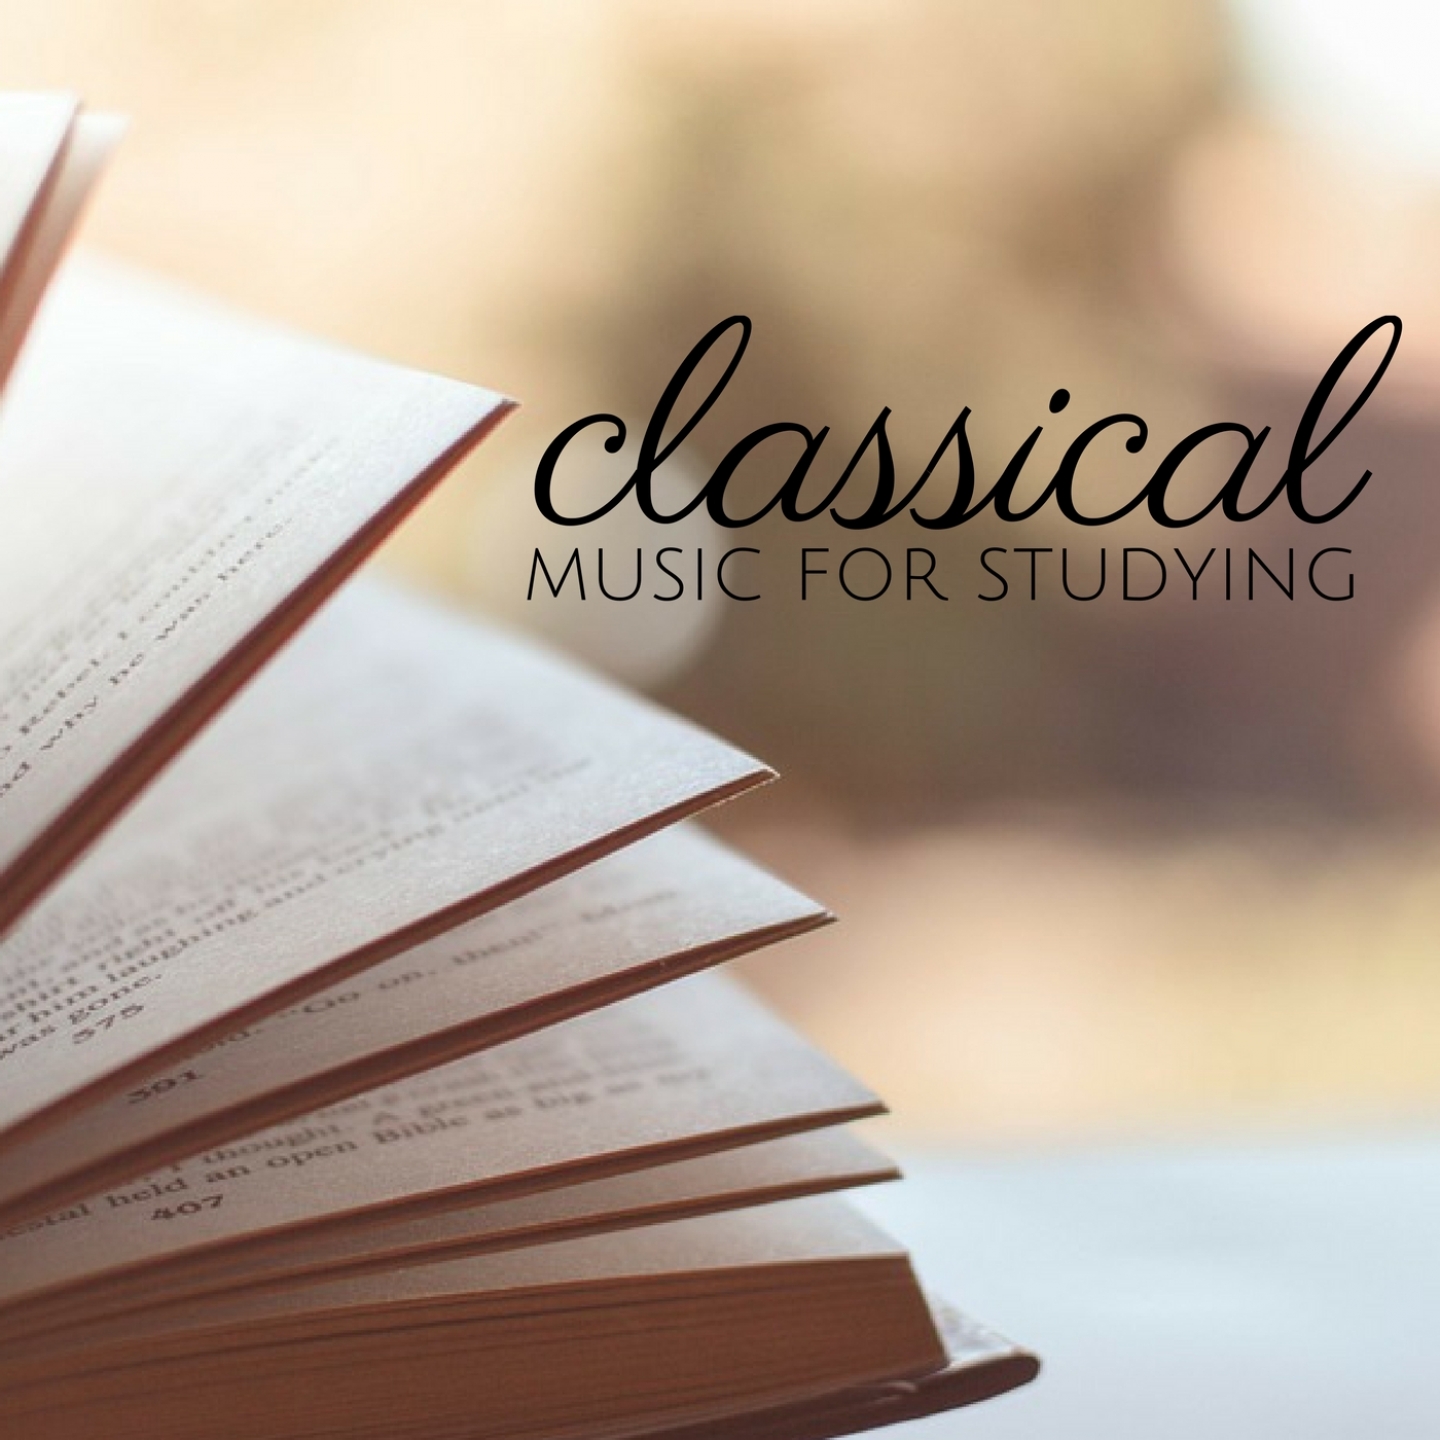 Classical Music for Studying, Reading and Concentration